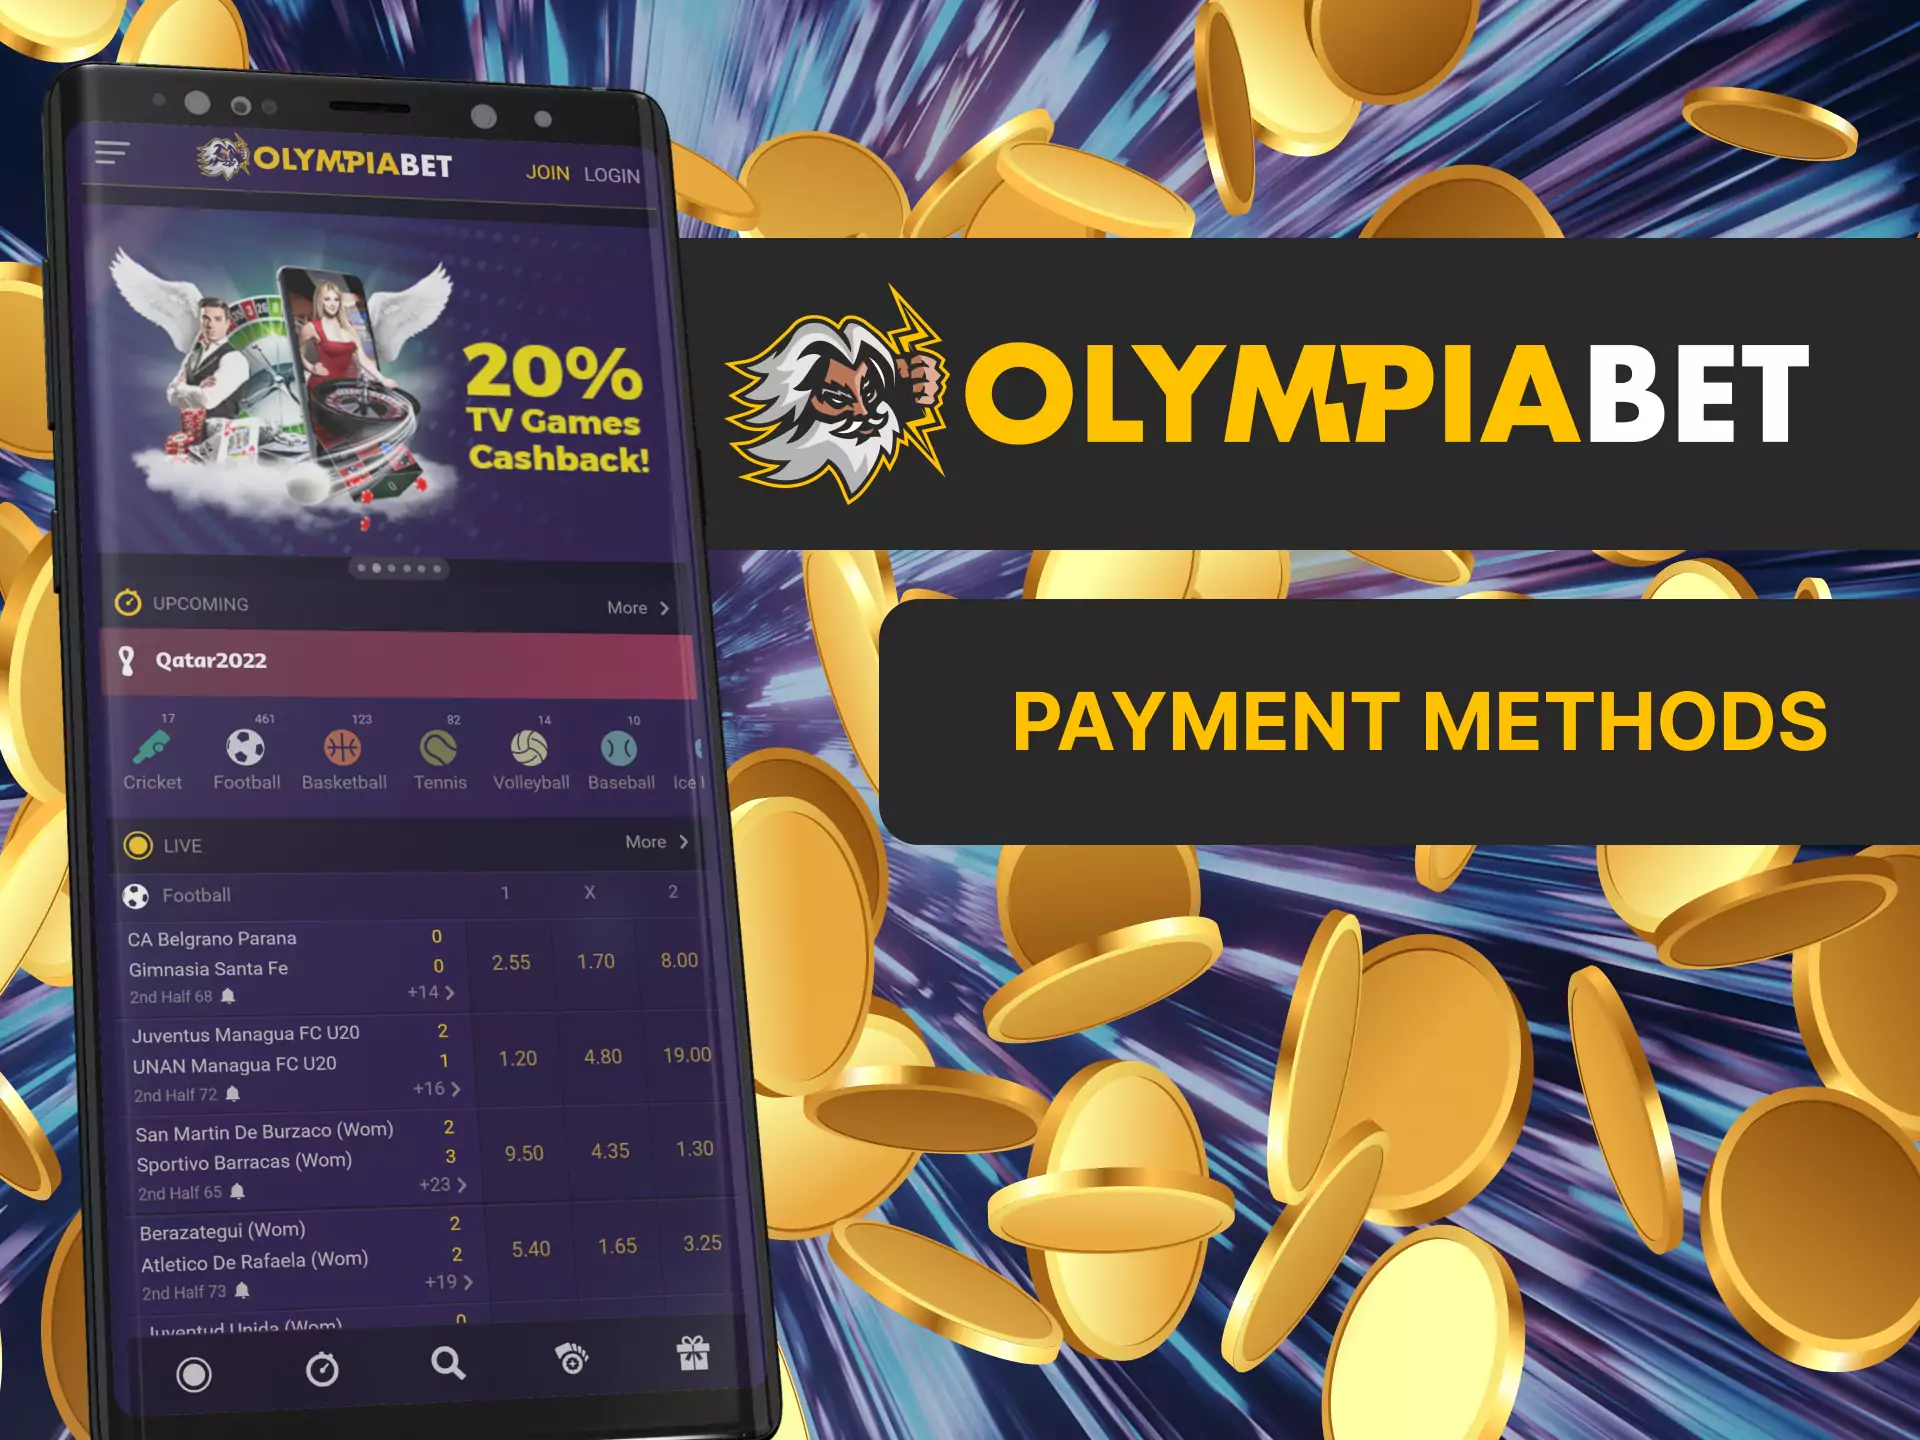 Learn about the deposit methods and how to withdraw money from your OlympiaBet account.